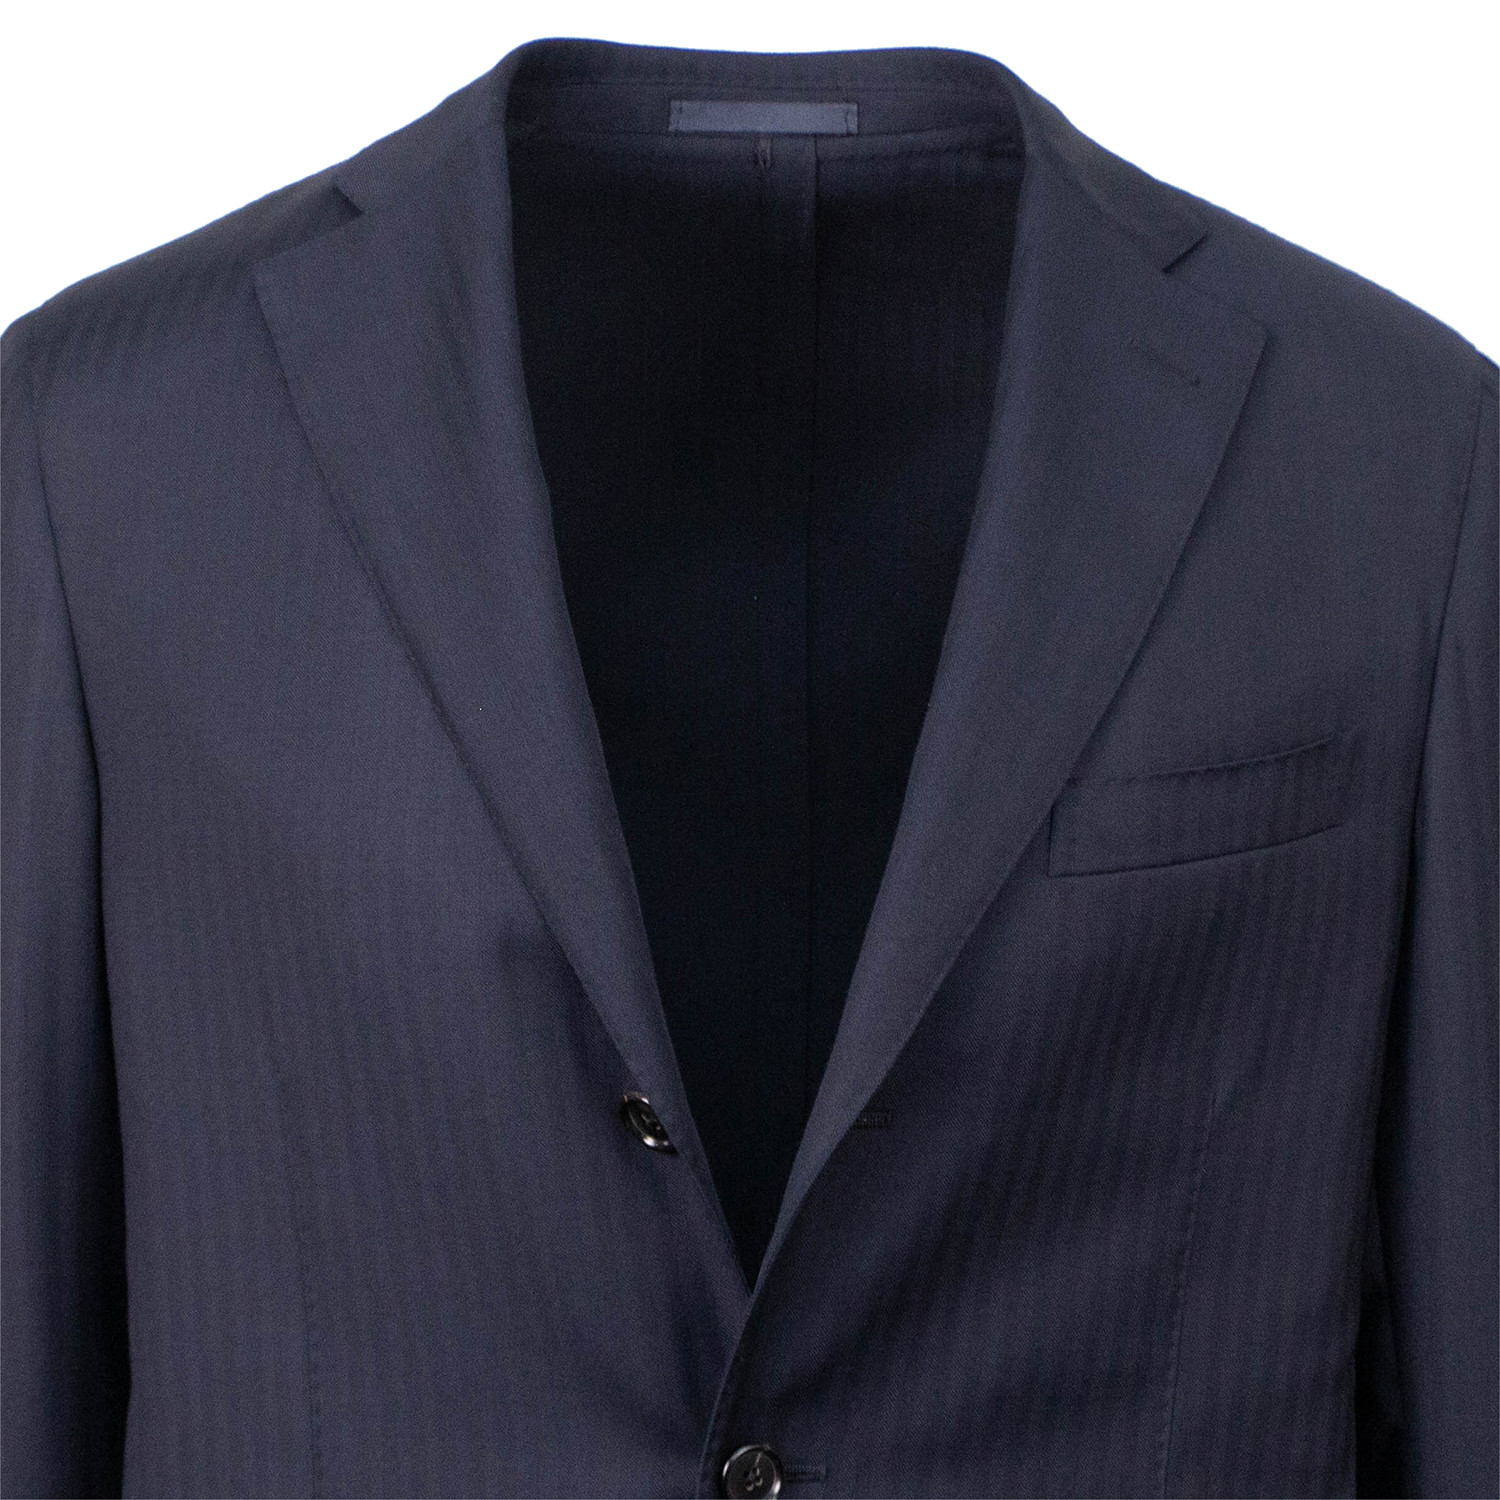 Wool 3 Roll 2 Button Slim Fit Suit // Navy Blue (US: 44S) - Caruso ...